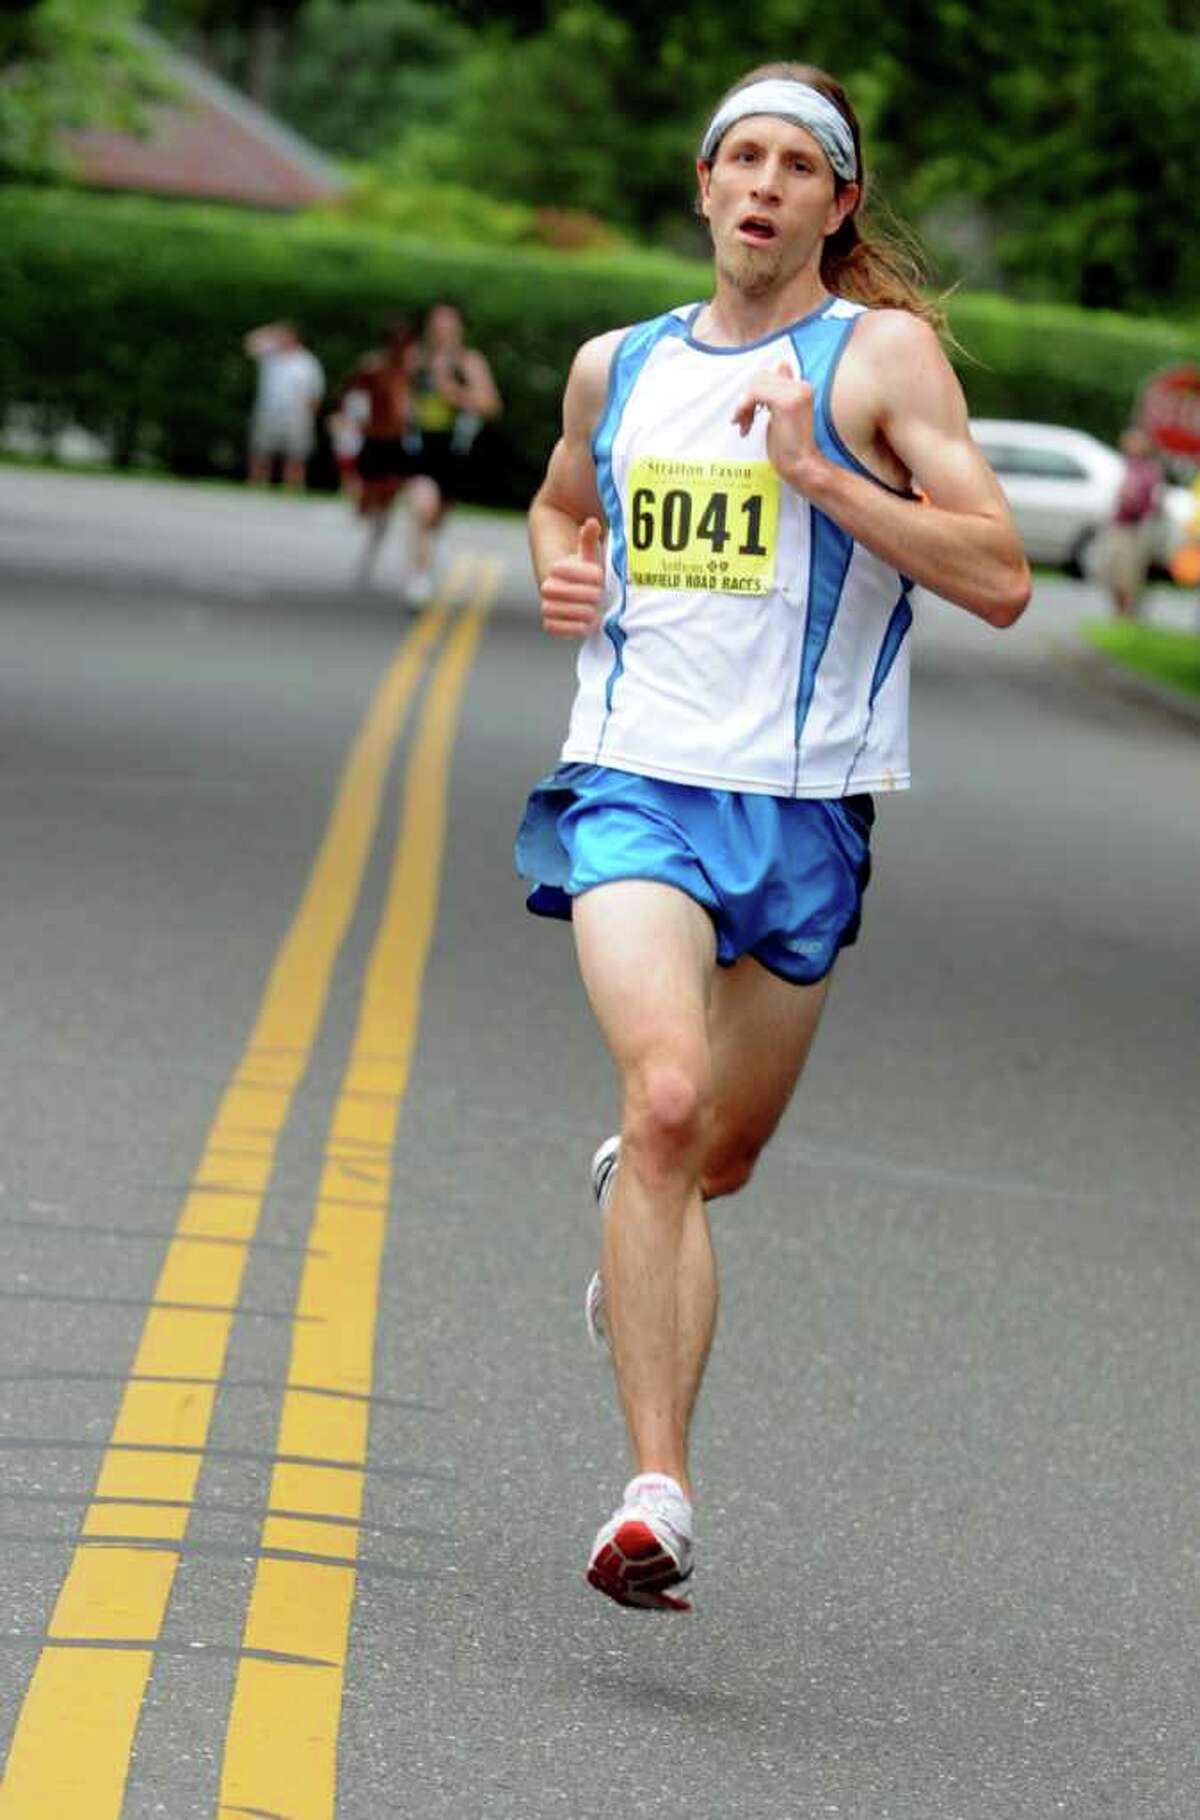 Timothy Milenkevich, of Ansonia, maintains the lead Saturday, June 25, 2011 during the Stratton Faxon 5K through Fairfield, Conn. Milenkevich finished the race in 16:07.